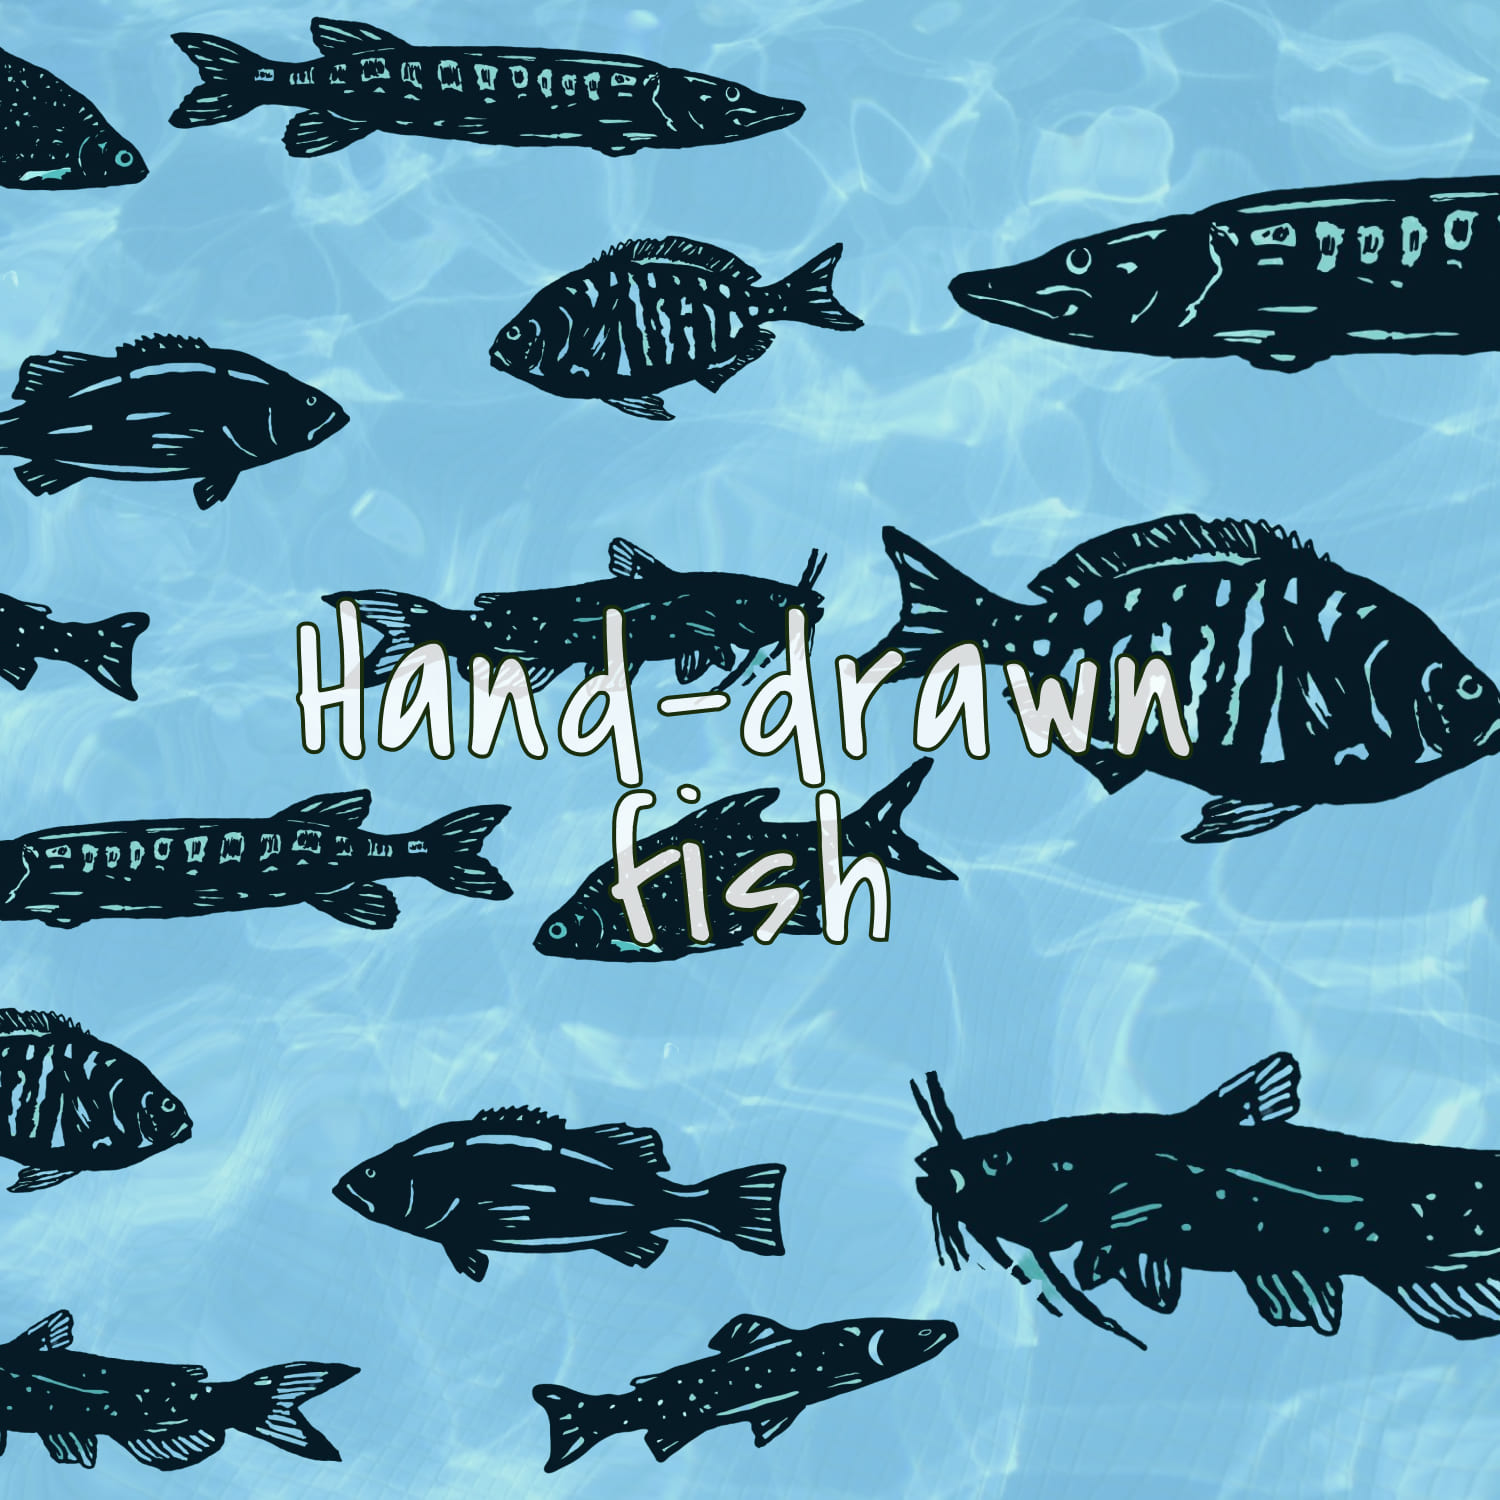 Fully hand-drawn digitalized fish vectors for your best graphics.